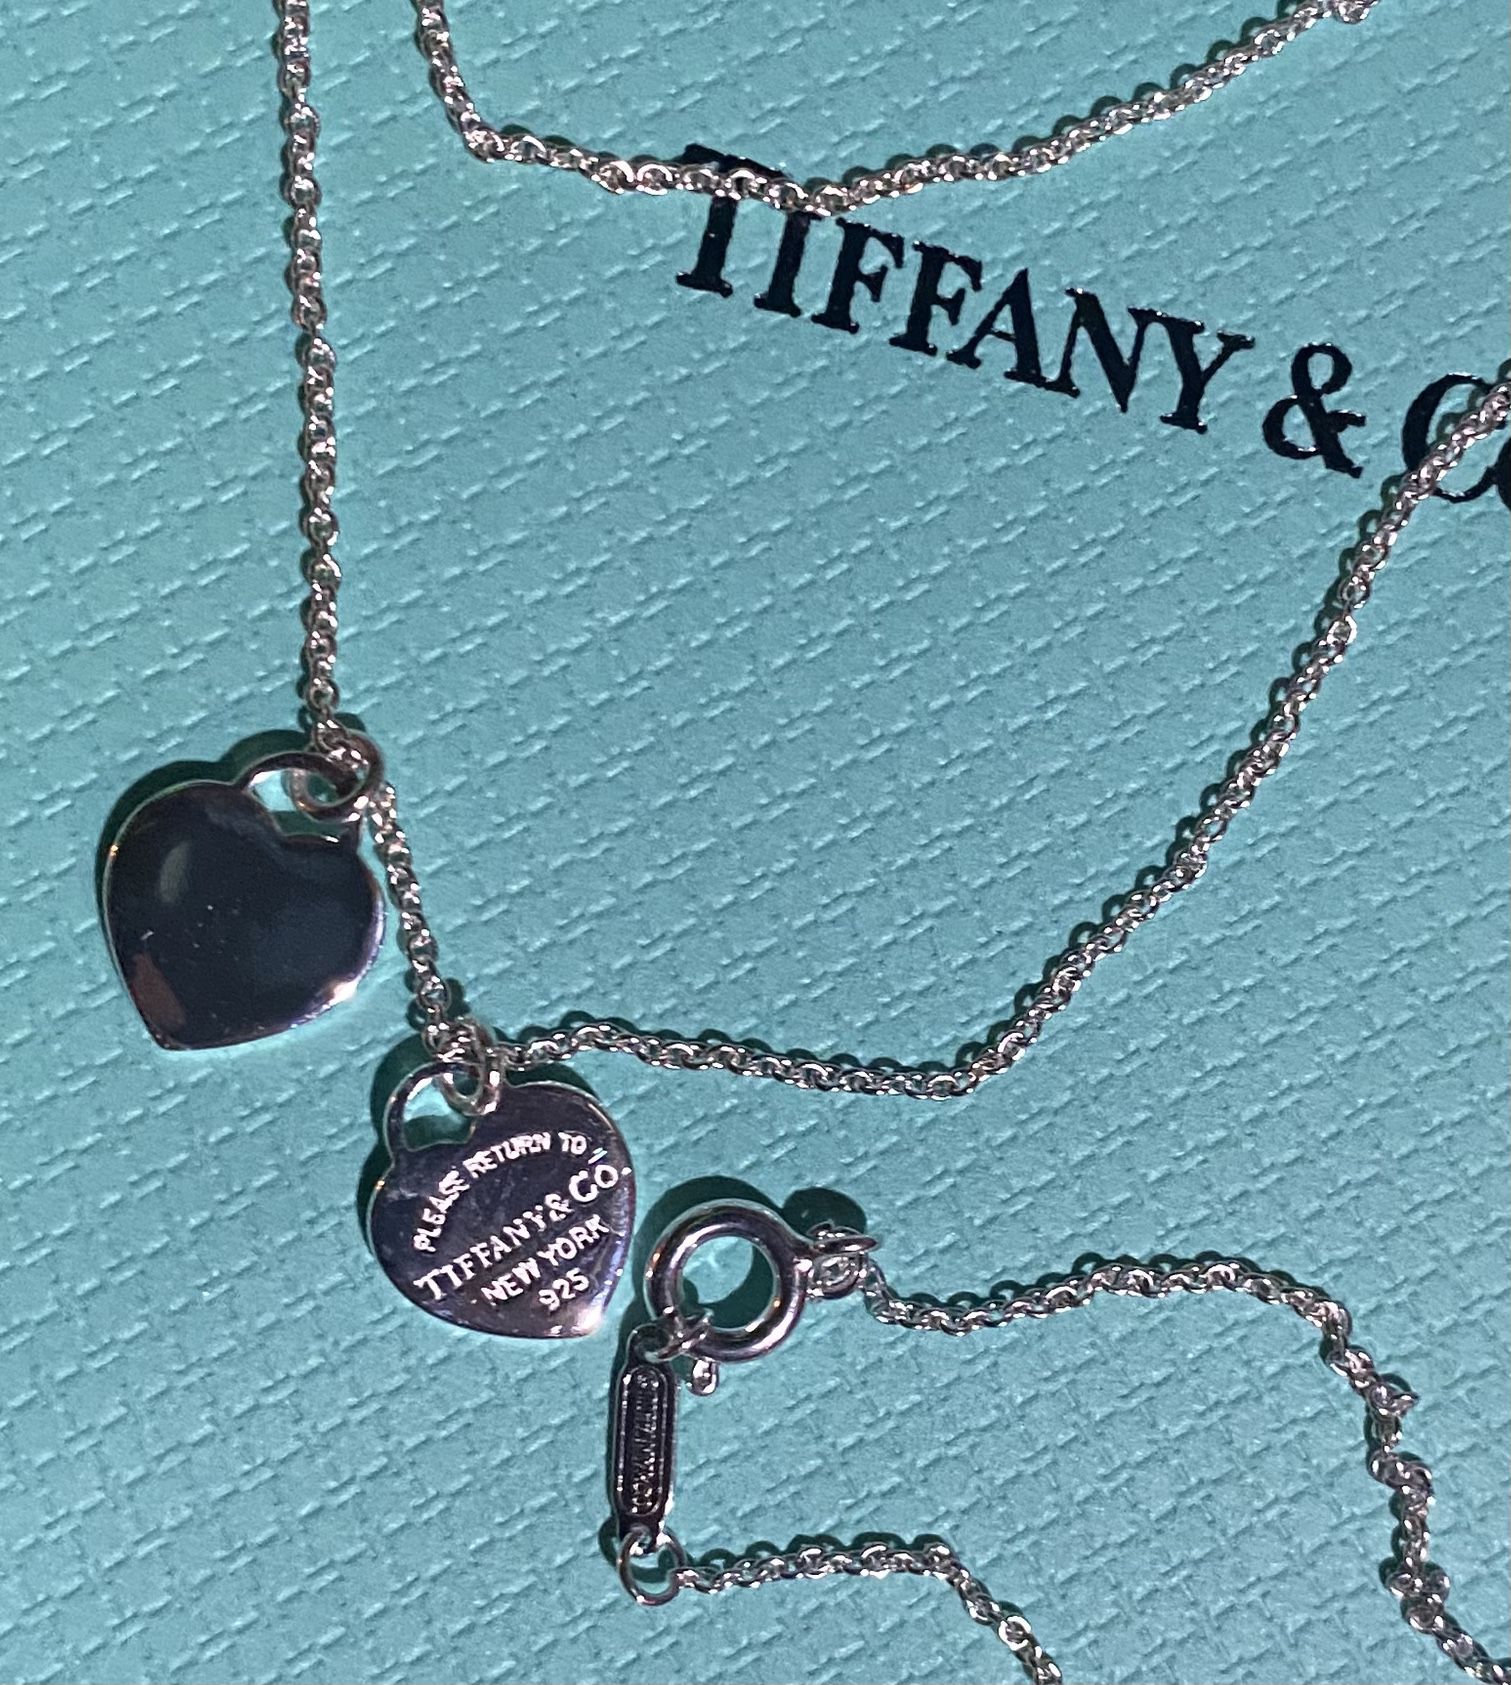 Tiffany And Co Double Heart Charm Necklace 925